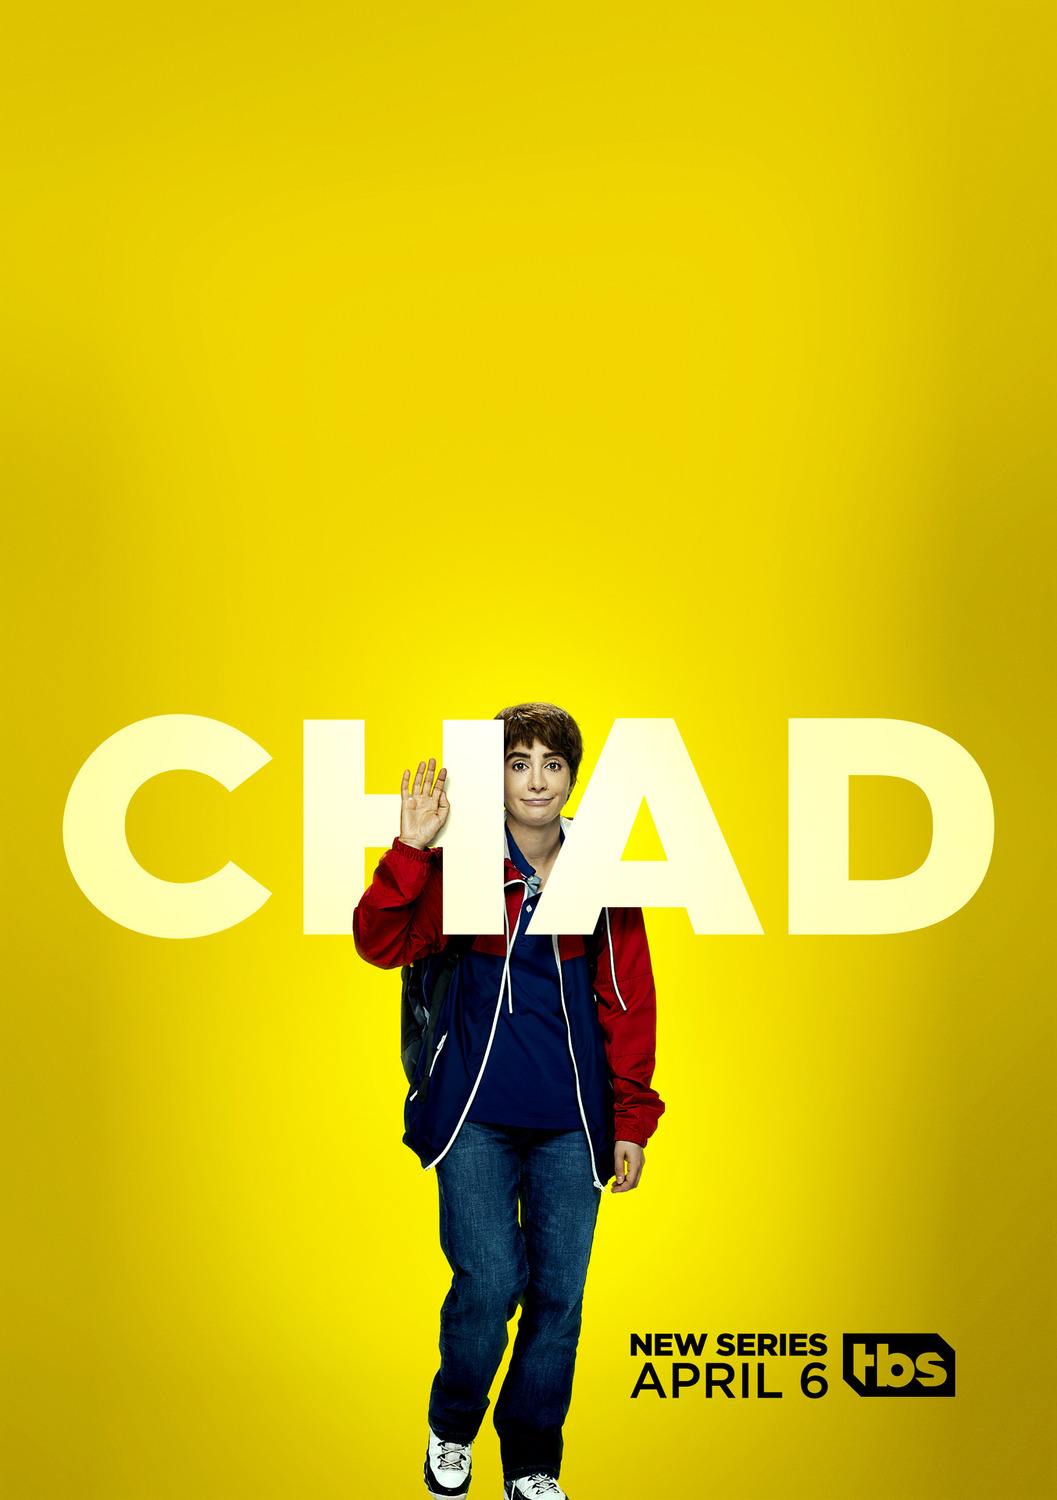 Extra Large Movie Poster Image for Chad 